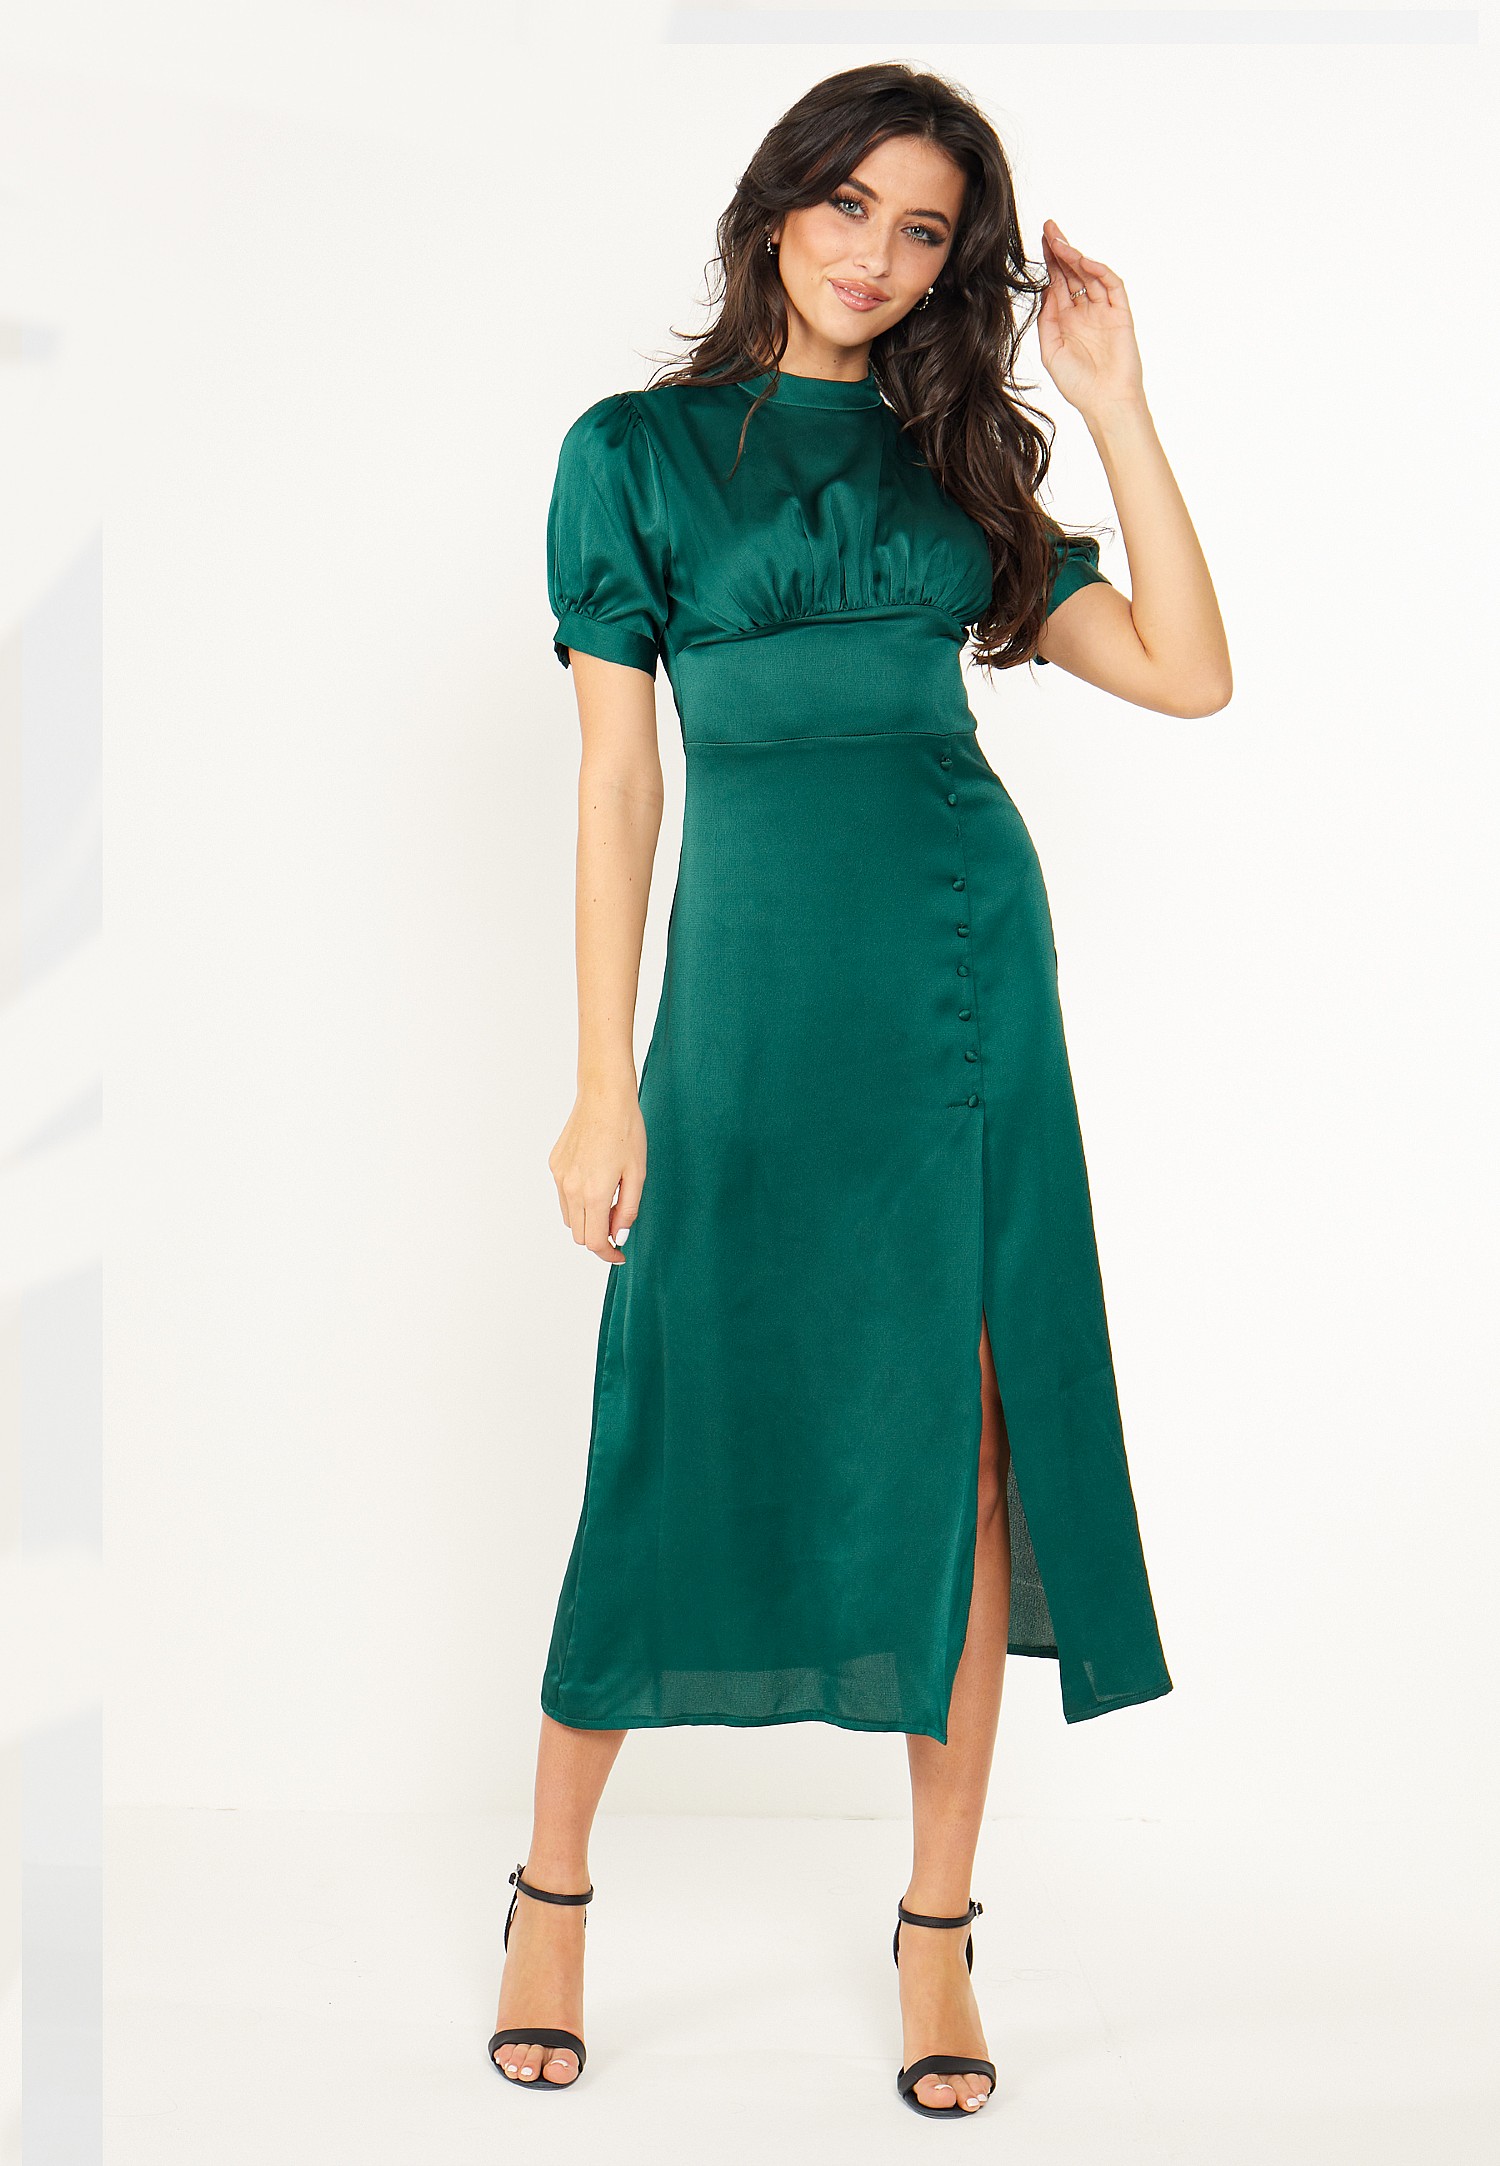 ANGELEYE Satin Touch Midi Dress with Short Sleeves in Emerald Green